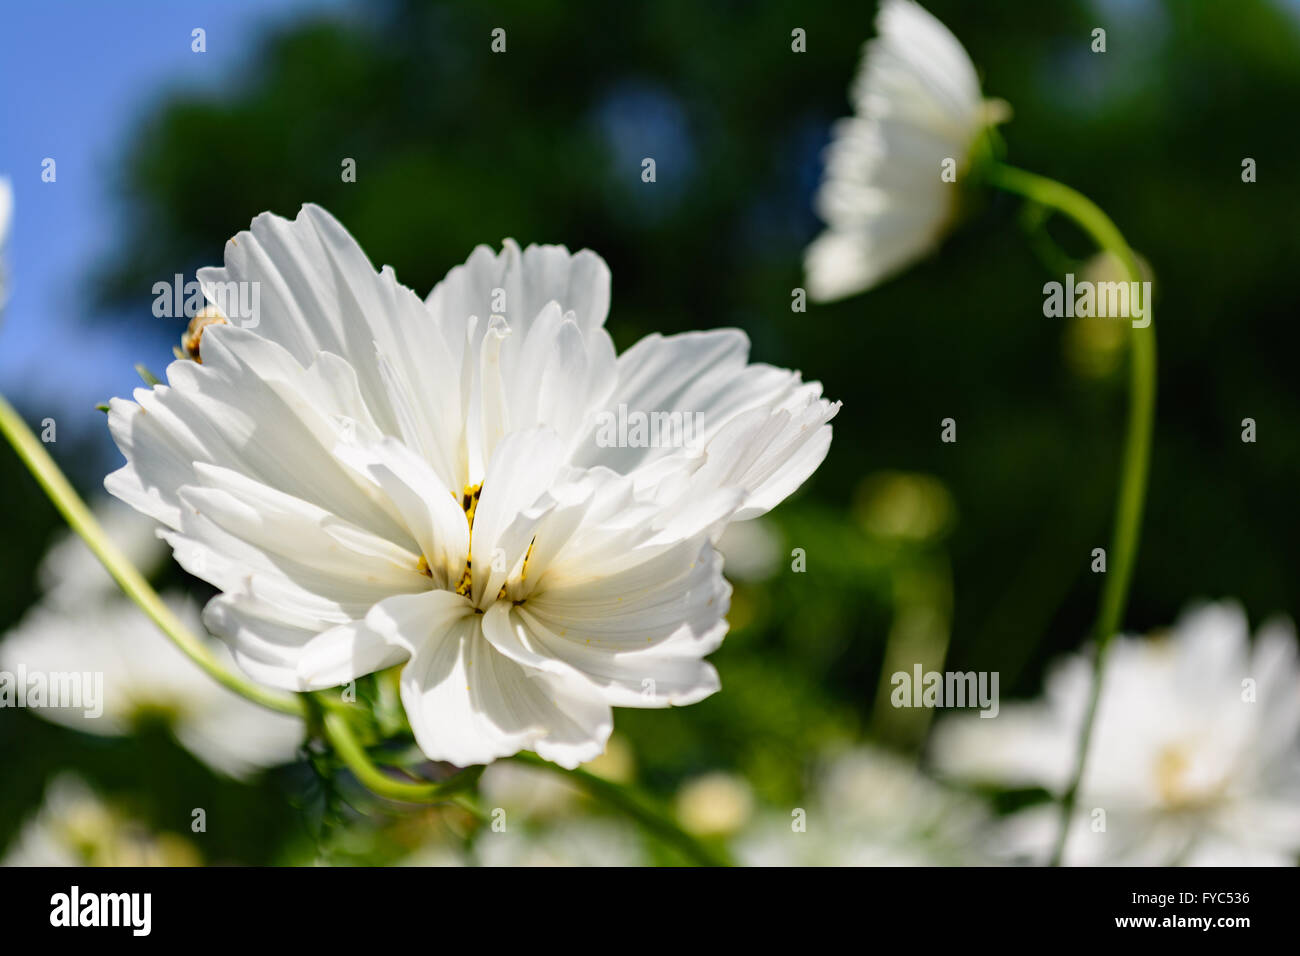 White flower selective focus foreground long stem flower in background Stock Photo